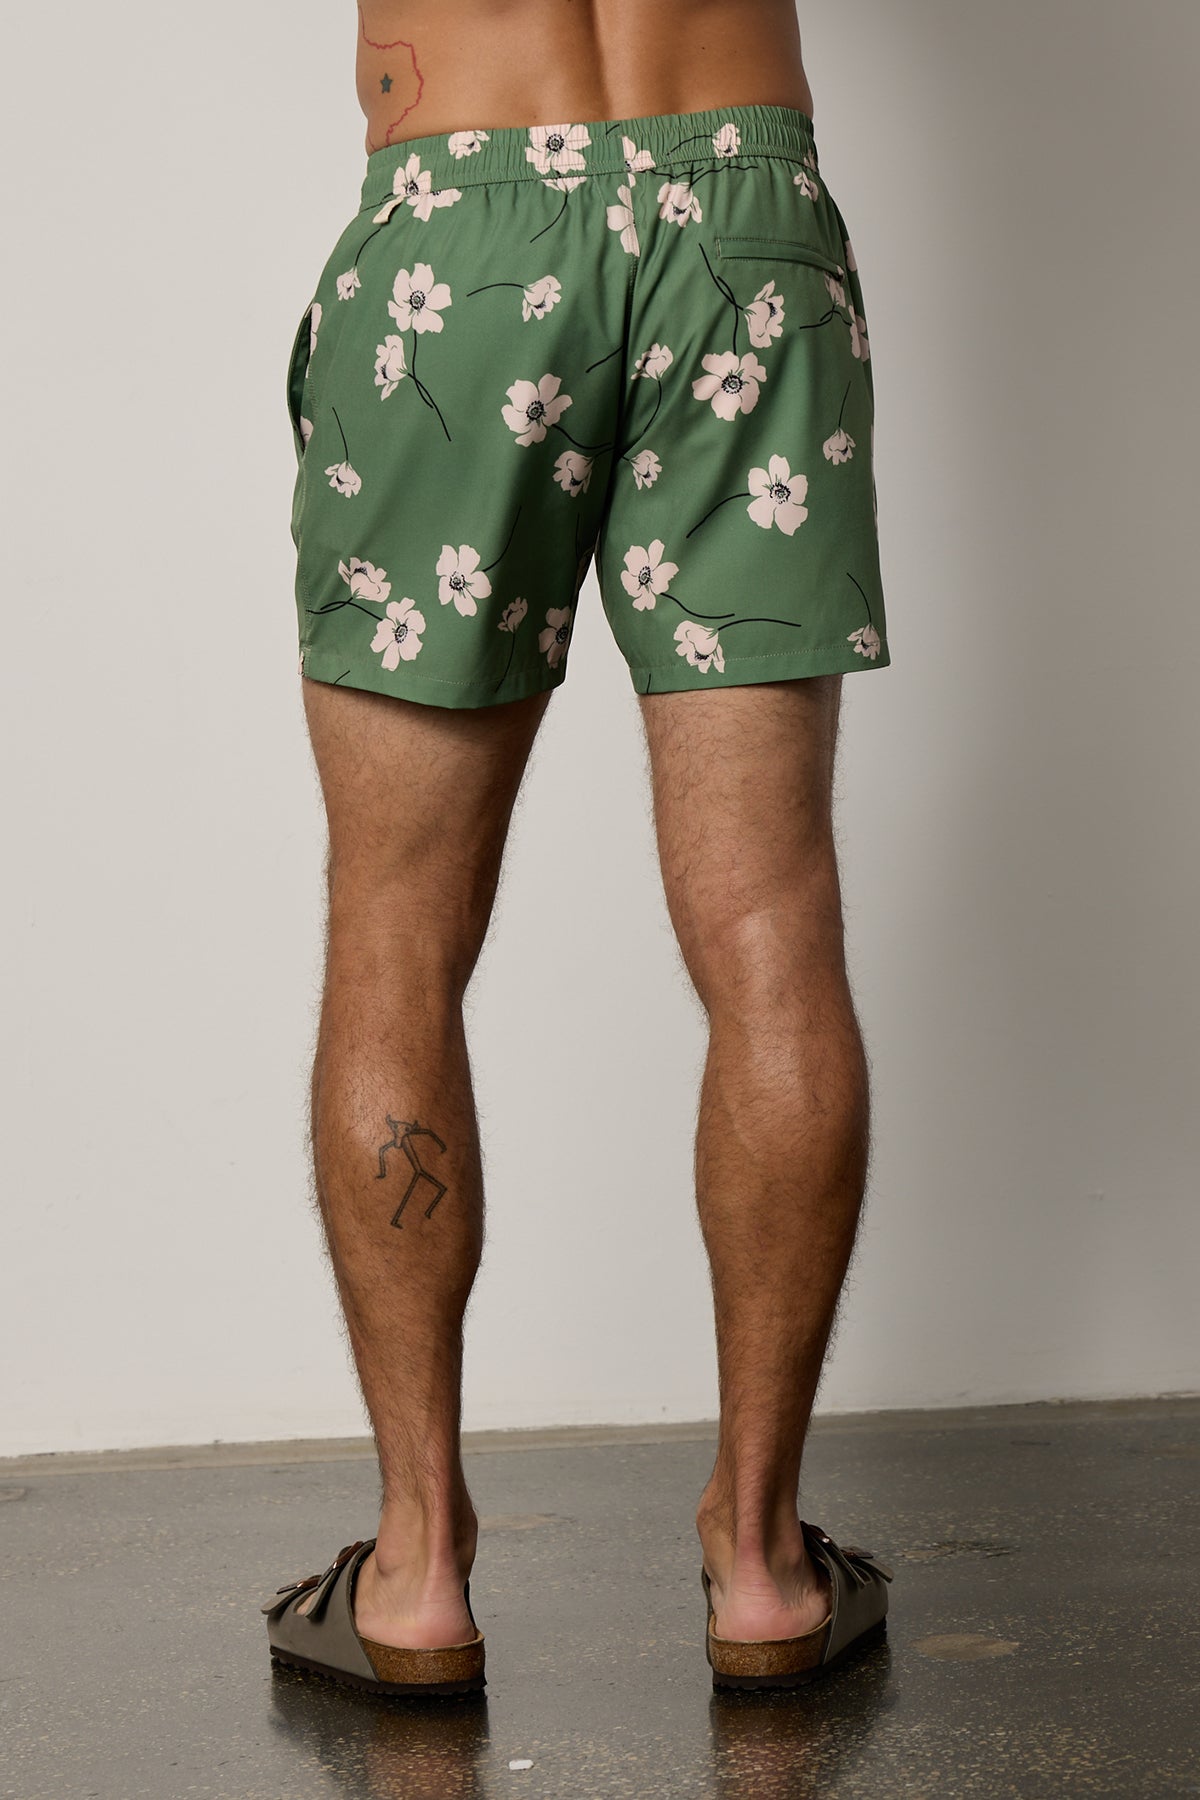   Ricardo Swim Short in print with green background and bold white floral back 